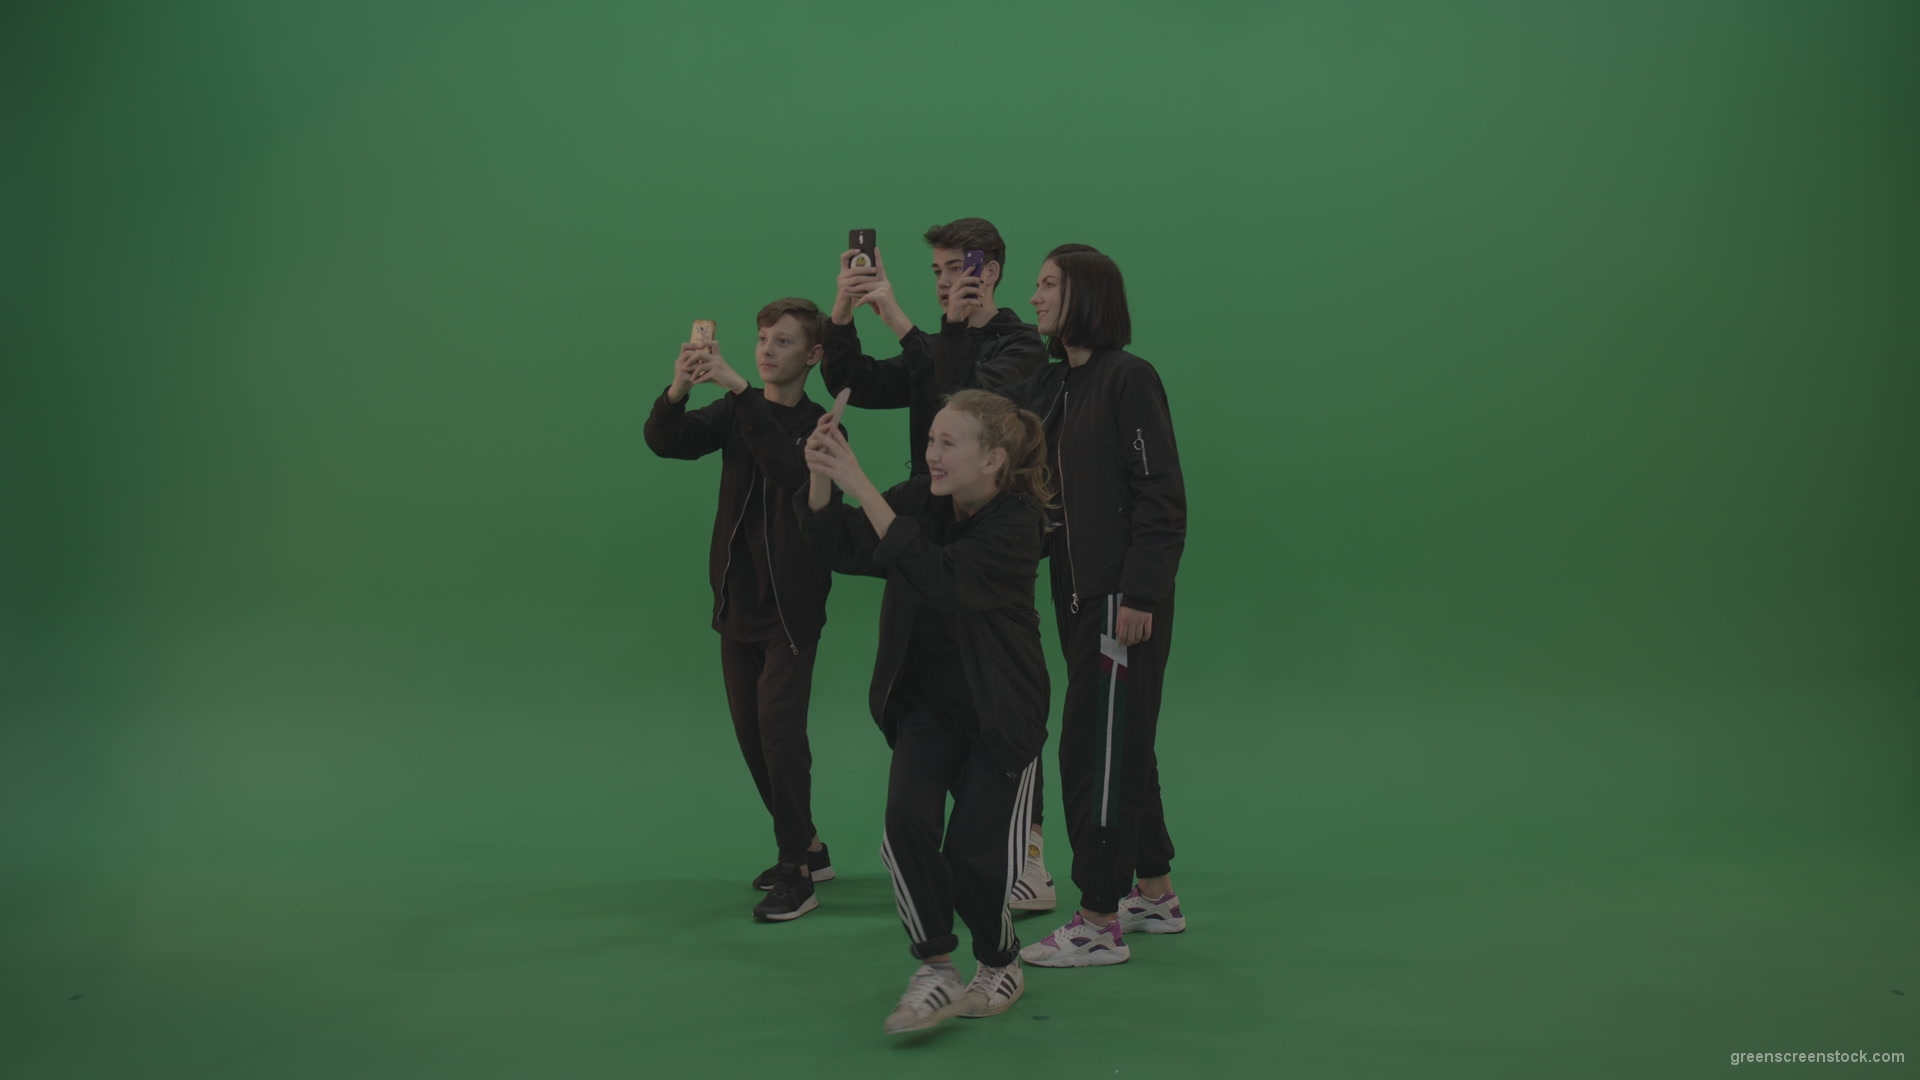 Four-kids-in-black-wears-take-pictures-over-chromakey-background_004 Green Screen Stock